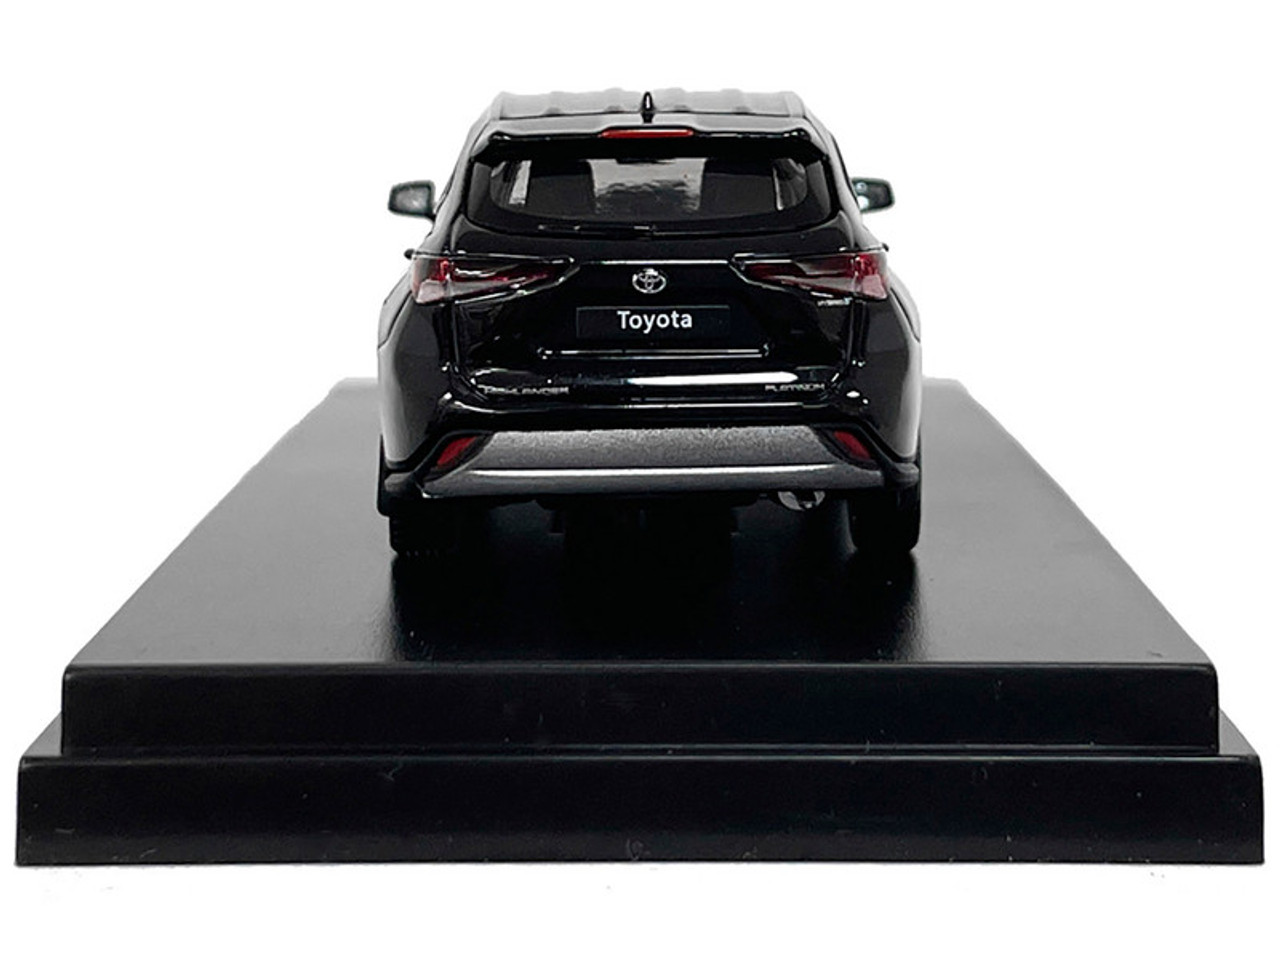 Toyota Highlander Black with Sunroof 1/64 Diecast Model Car by LCD Models